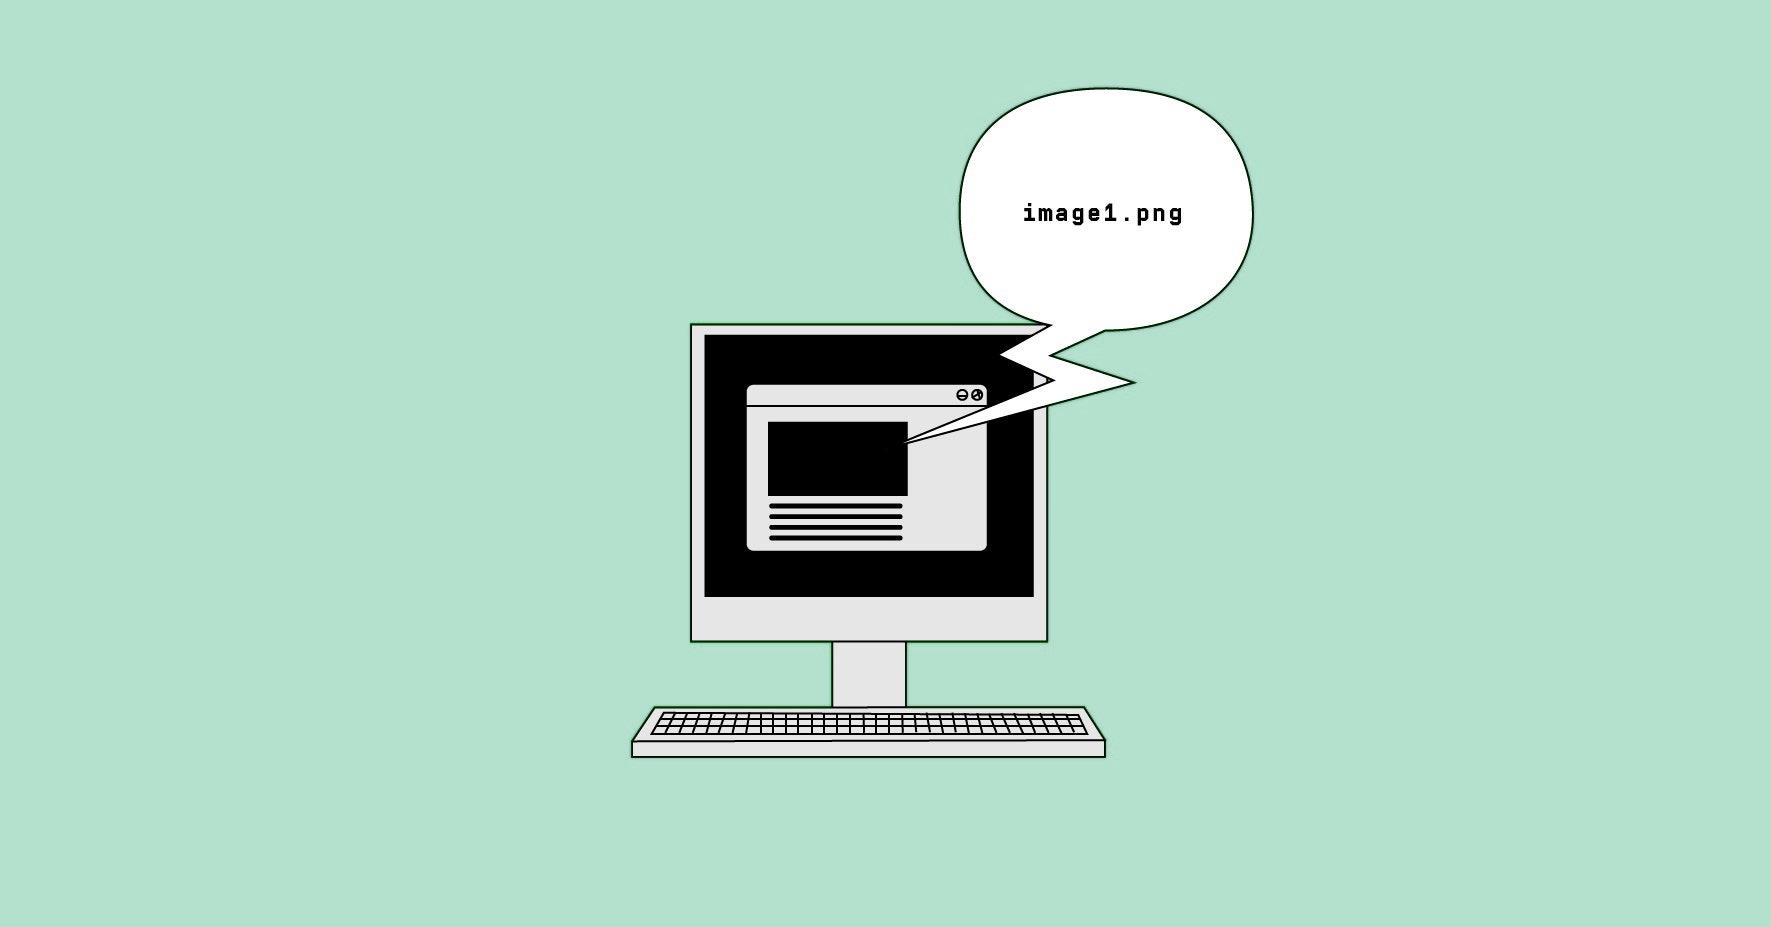 Computer screen displaying an image with a speech bubble saying image 1 dot PNG